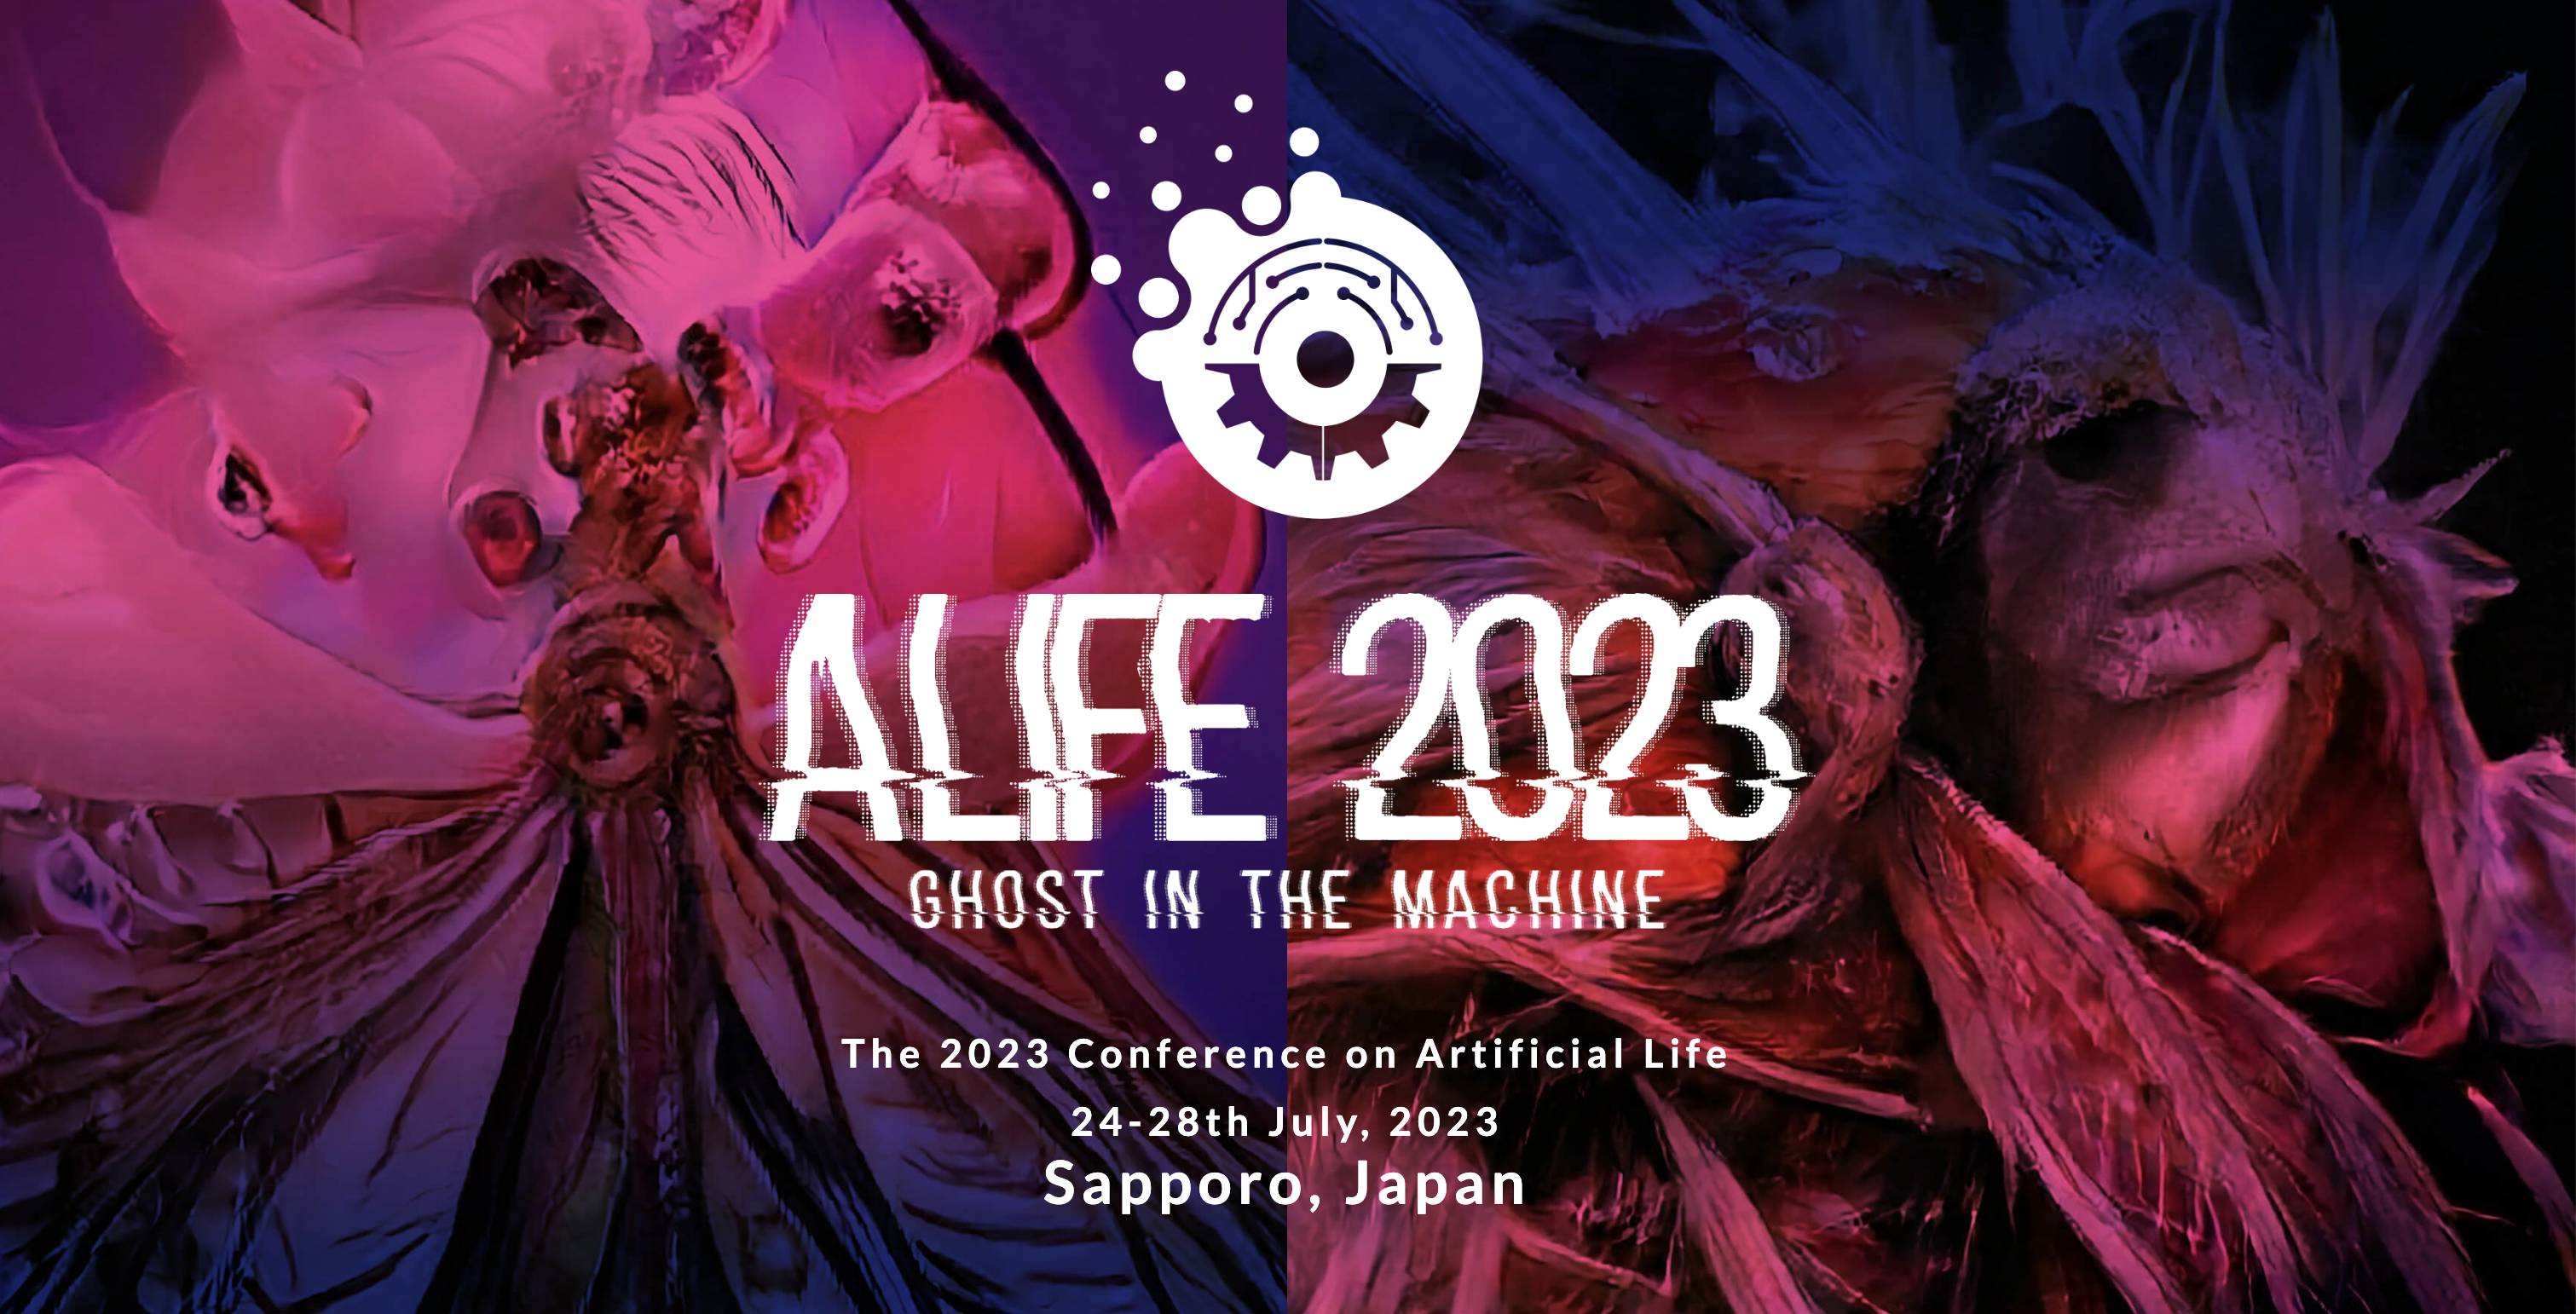 Presentations of our research members at the International Conference on Artificial Life, ALIFE2023